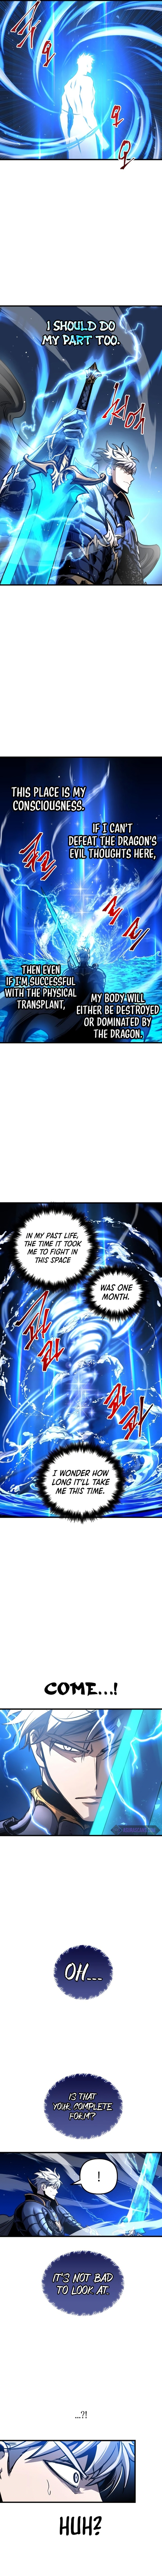 Reincarnation of the Suicidal Battle God - Chapter 72 Page 11